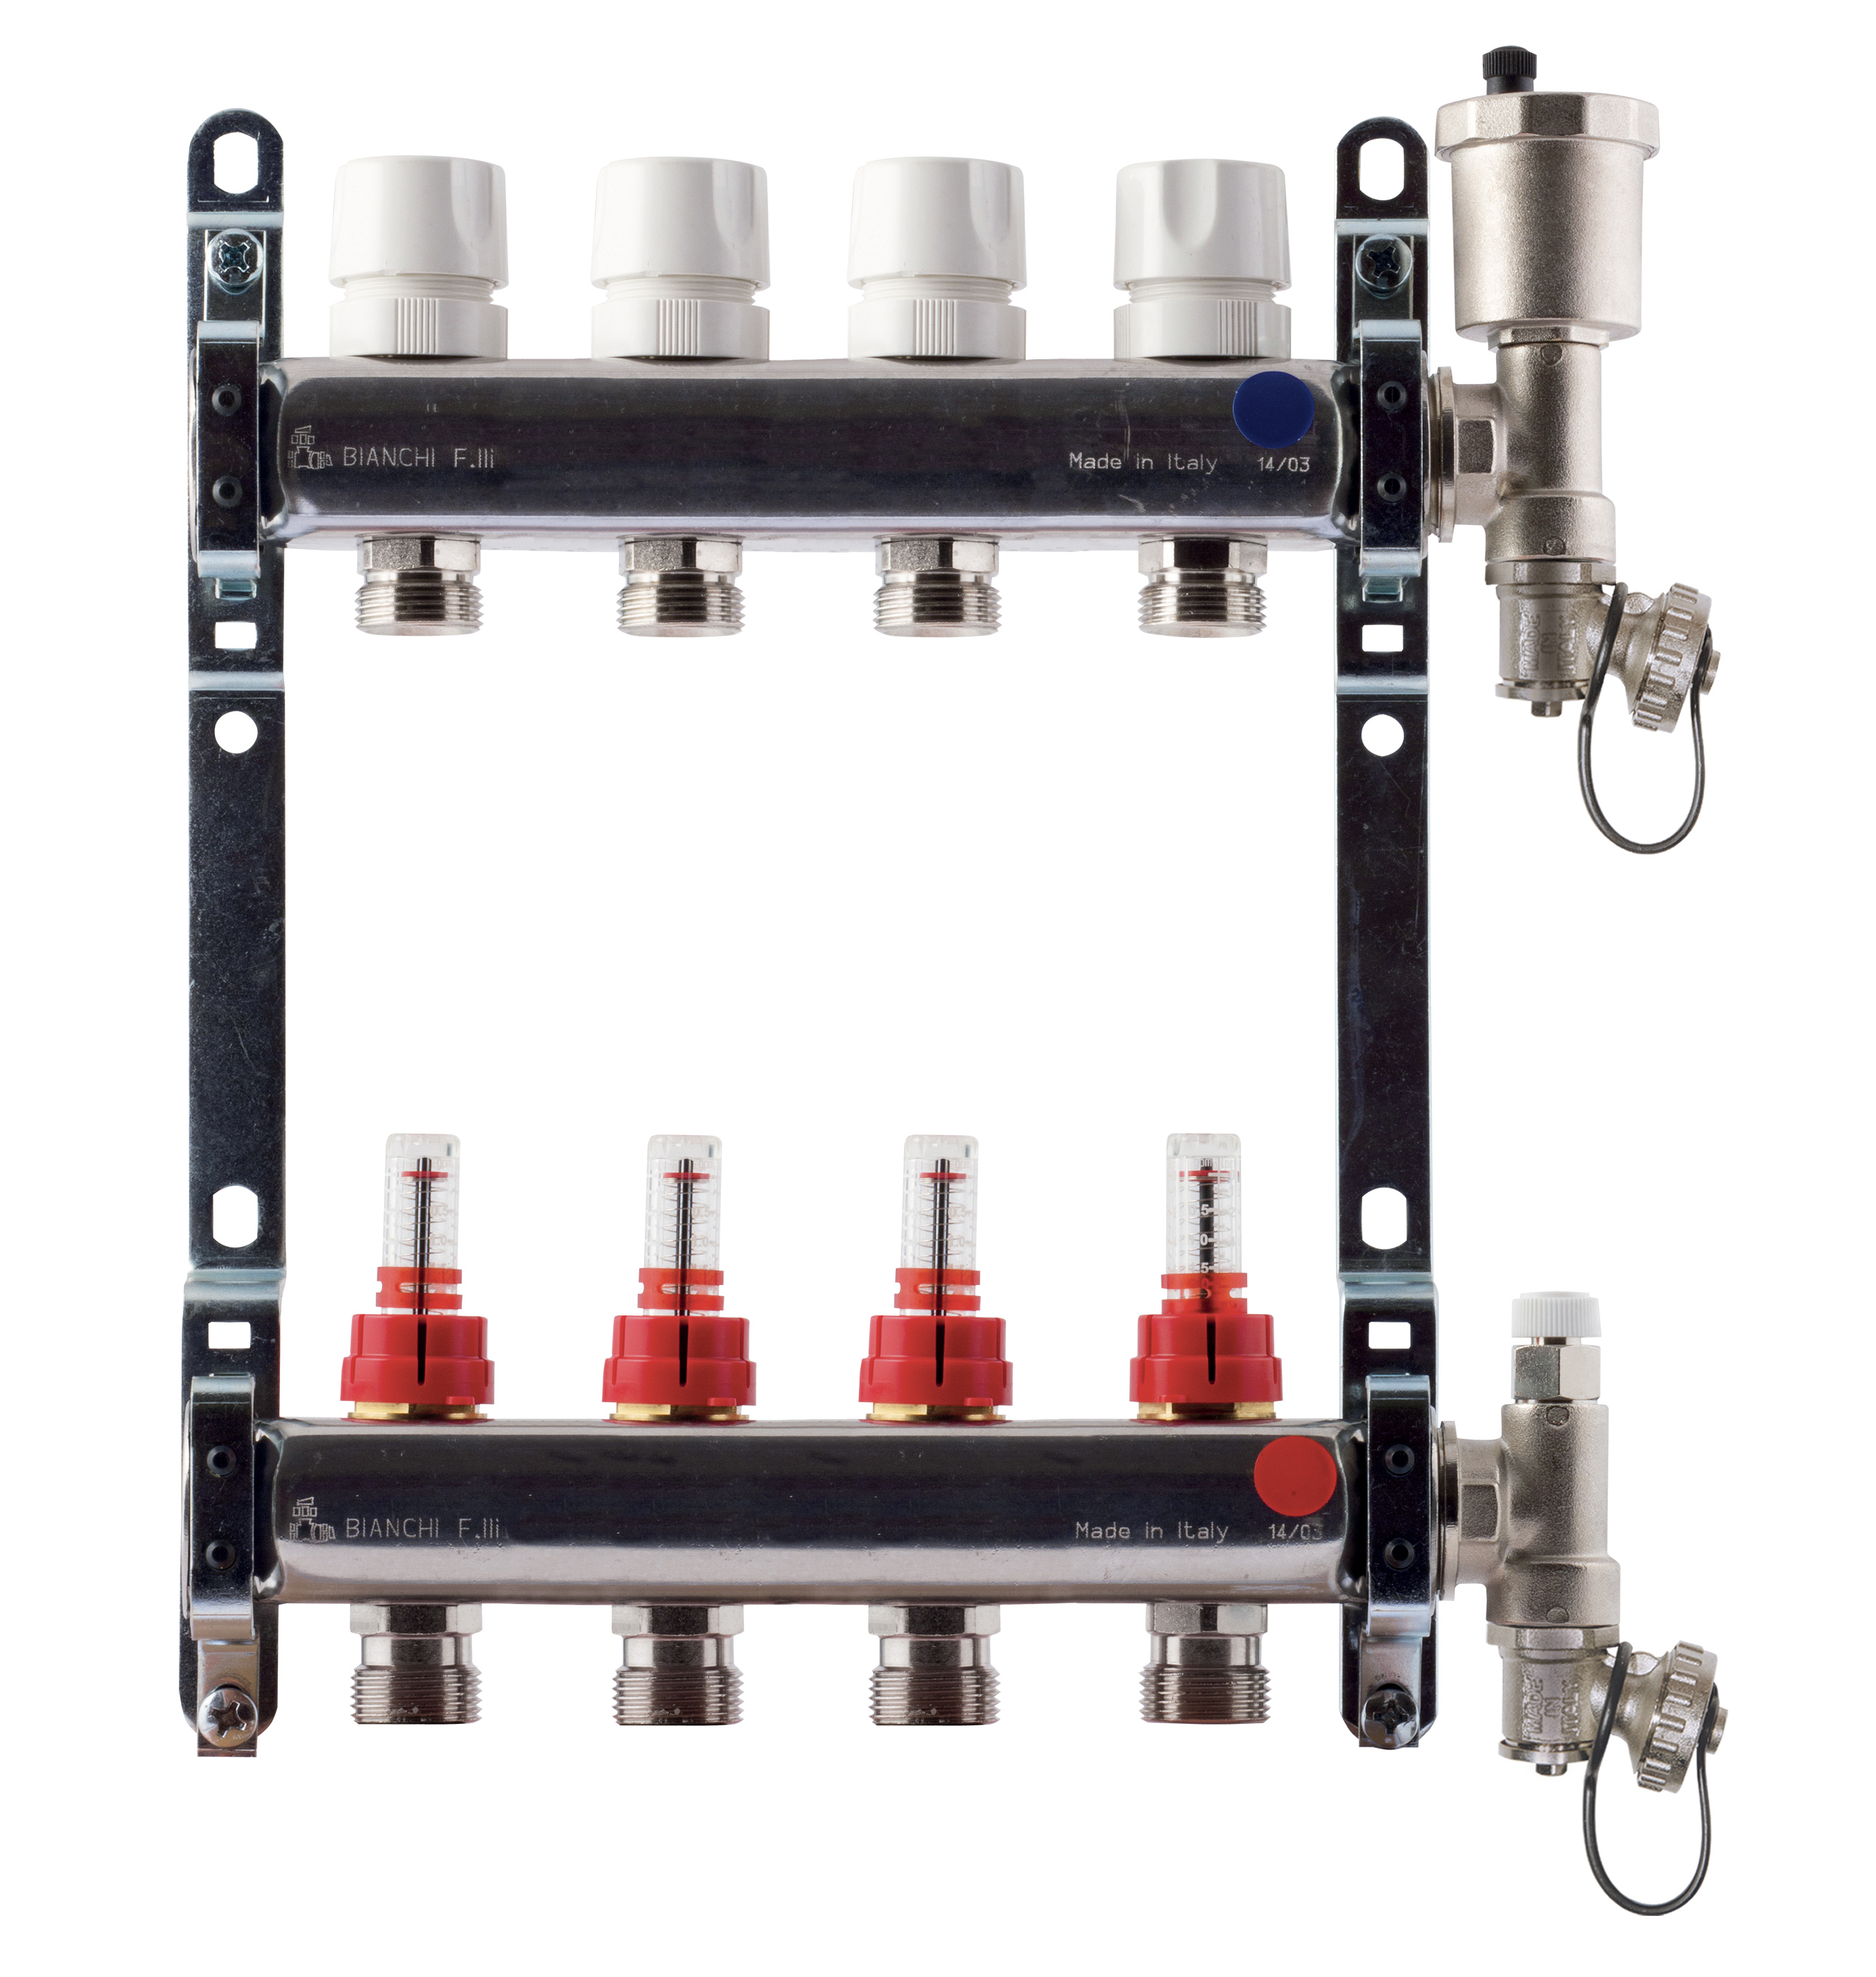 FF manifolds therm. valves and flowmeters and discharge %>